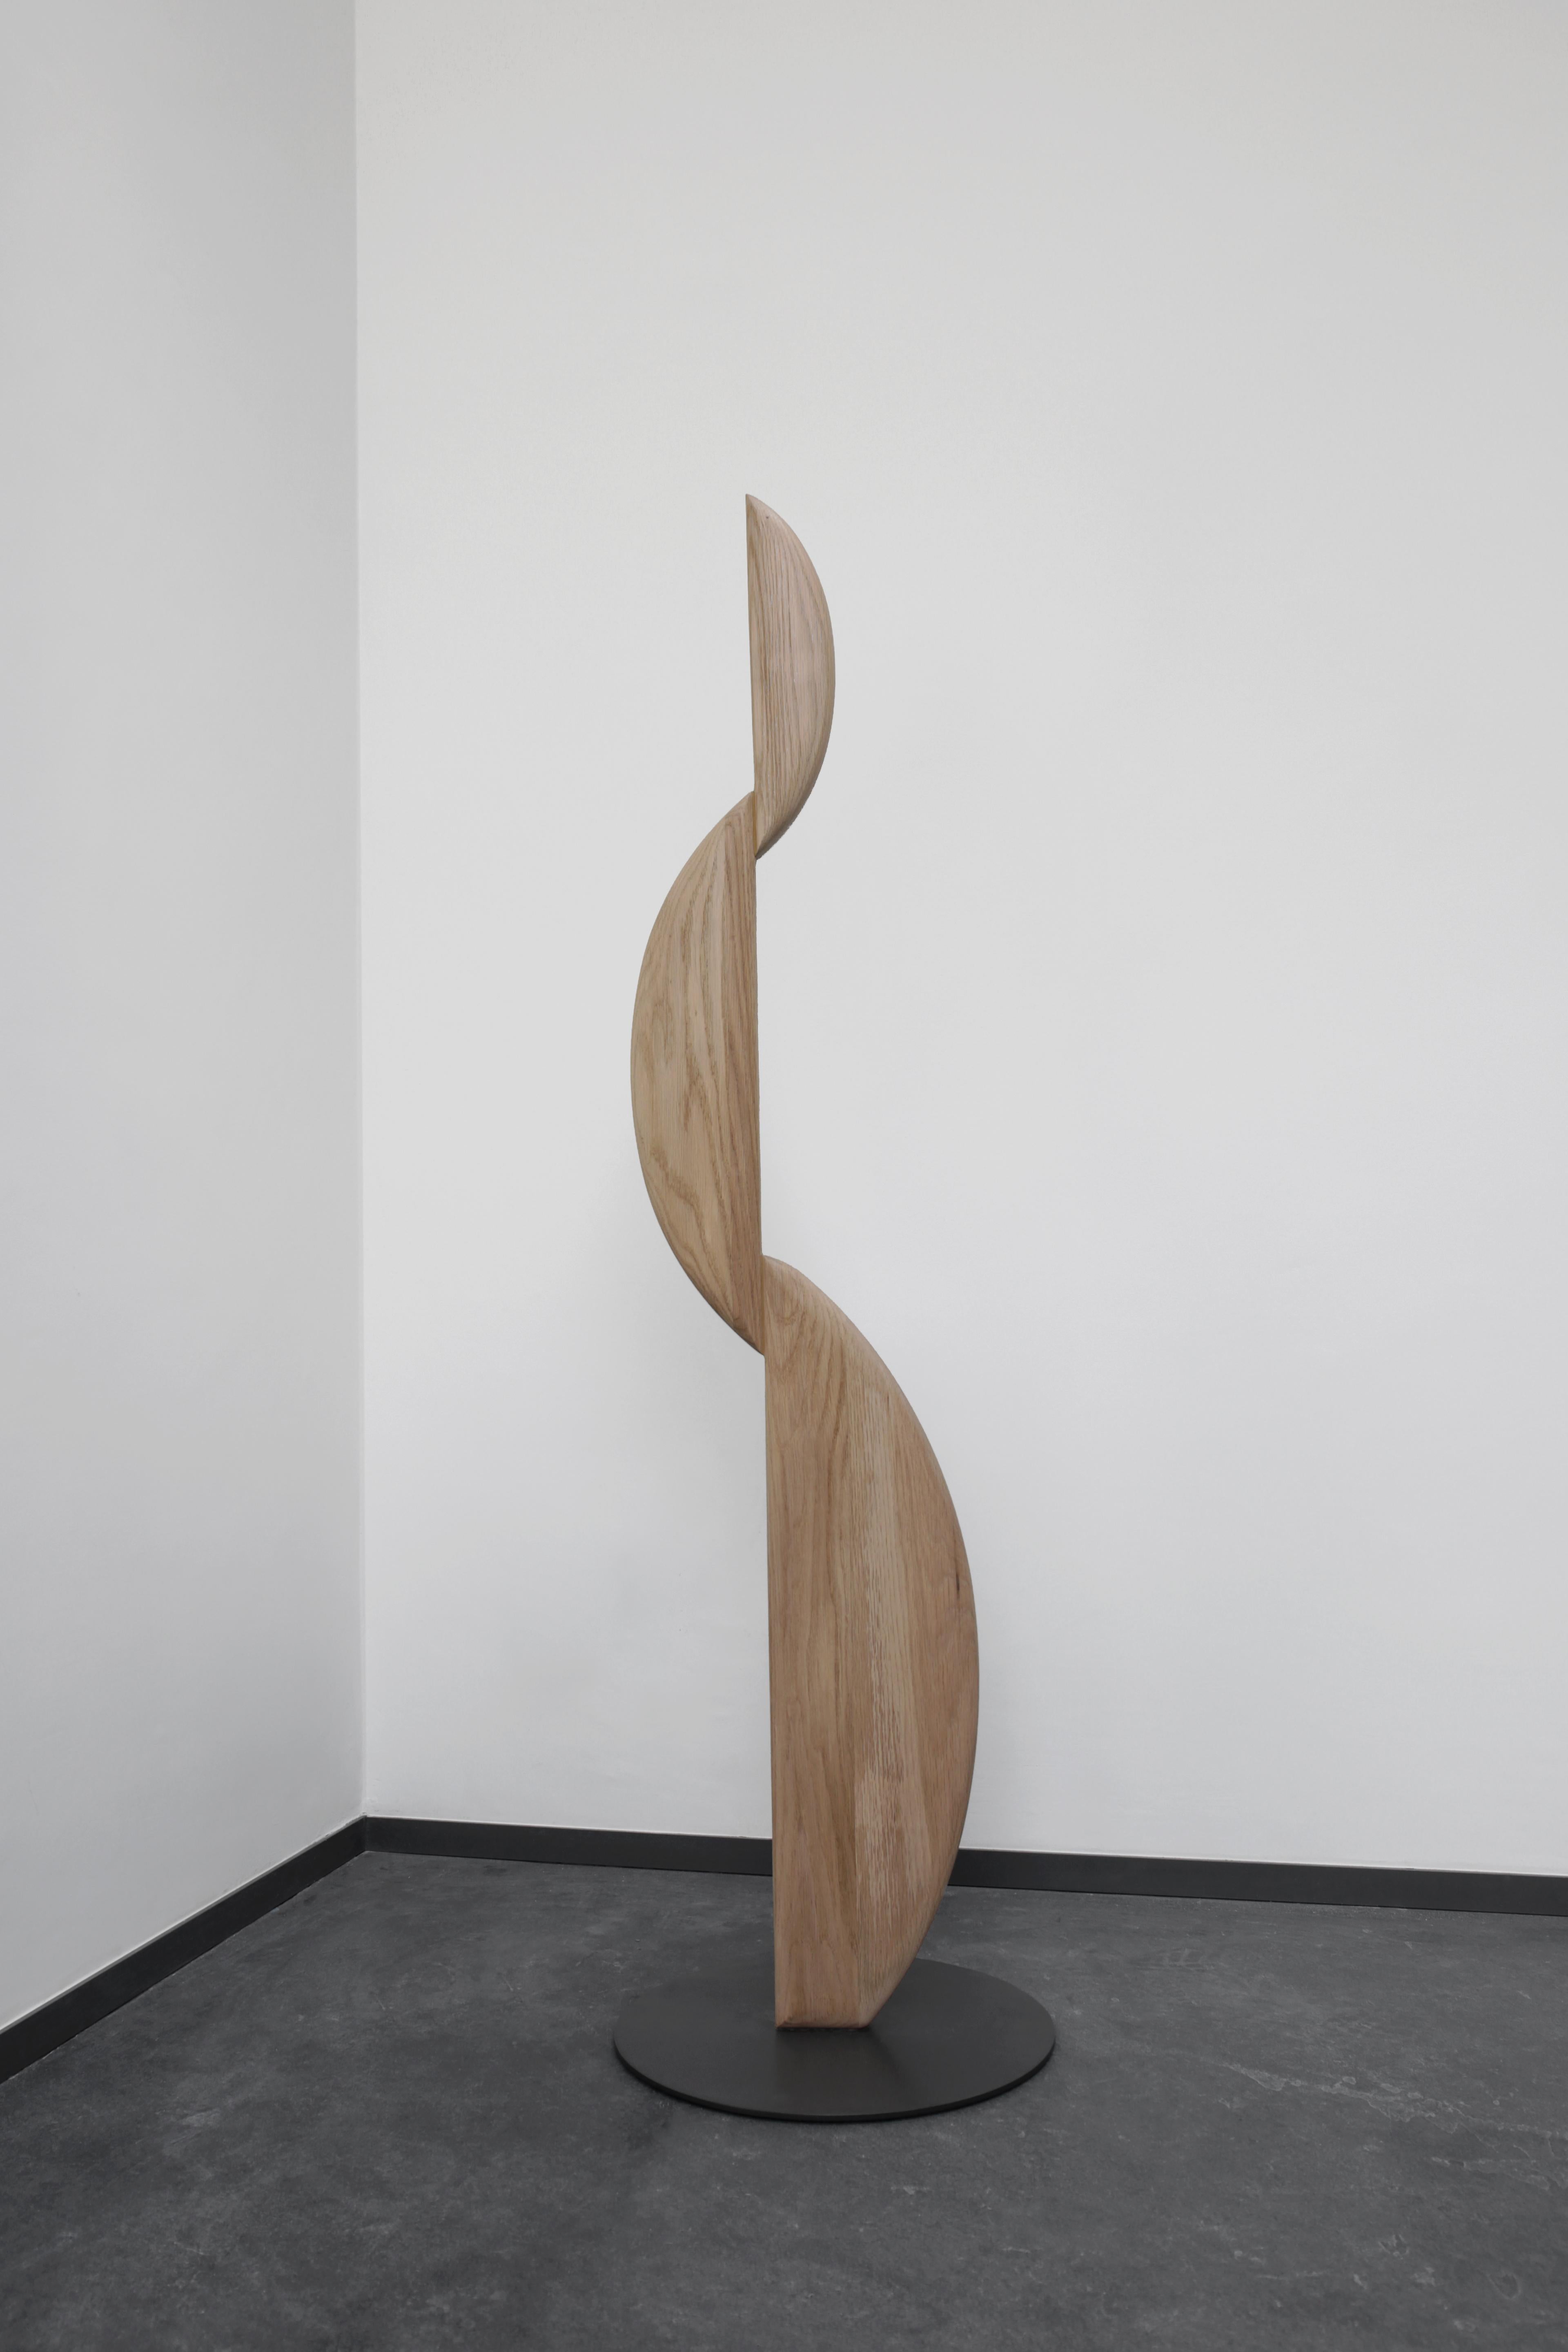 Noviembre III Standing Sculpture inspired in Brancusi, Solid Wood, Joel Escalona

The Noviembre collection is inspired by the creative values of Constantin Brancusi, a Romanian sculptor considered one of the most influential artists of the twentieth